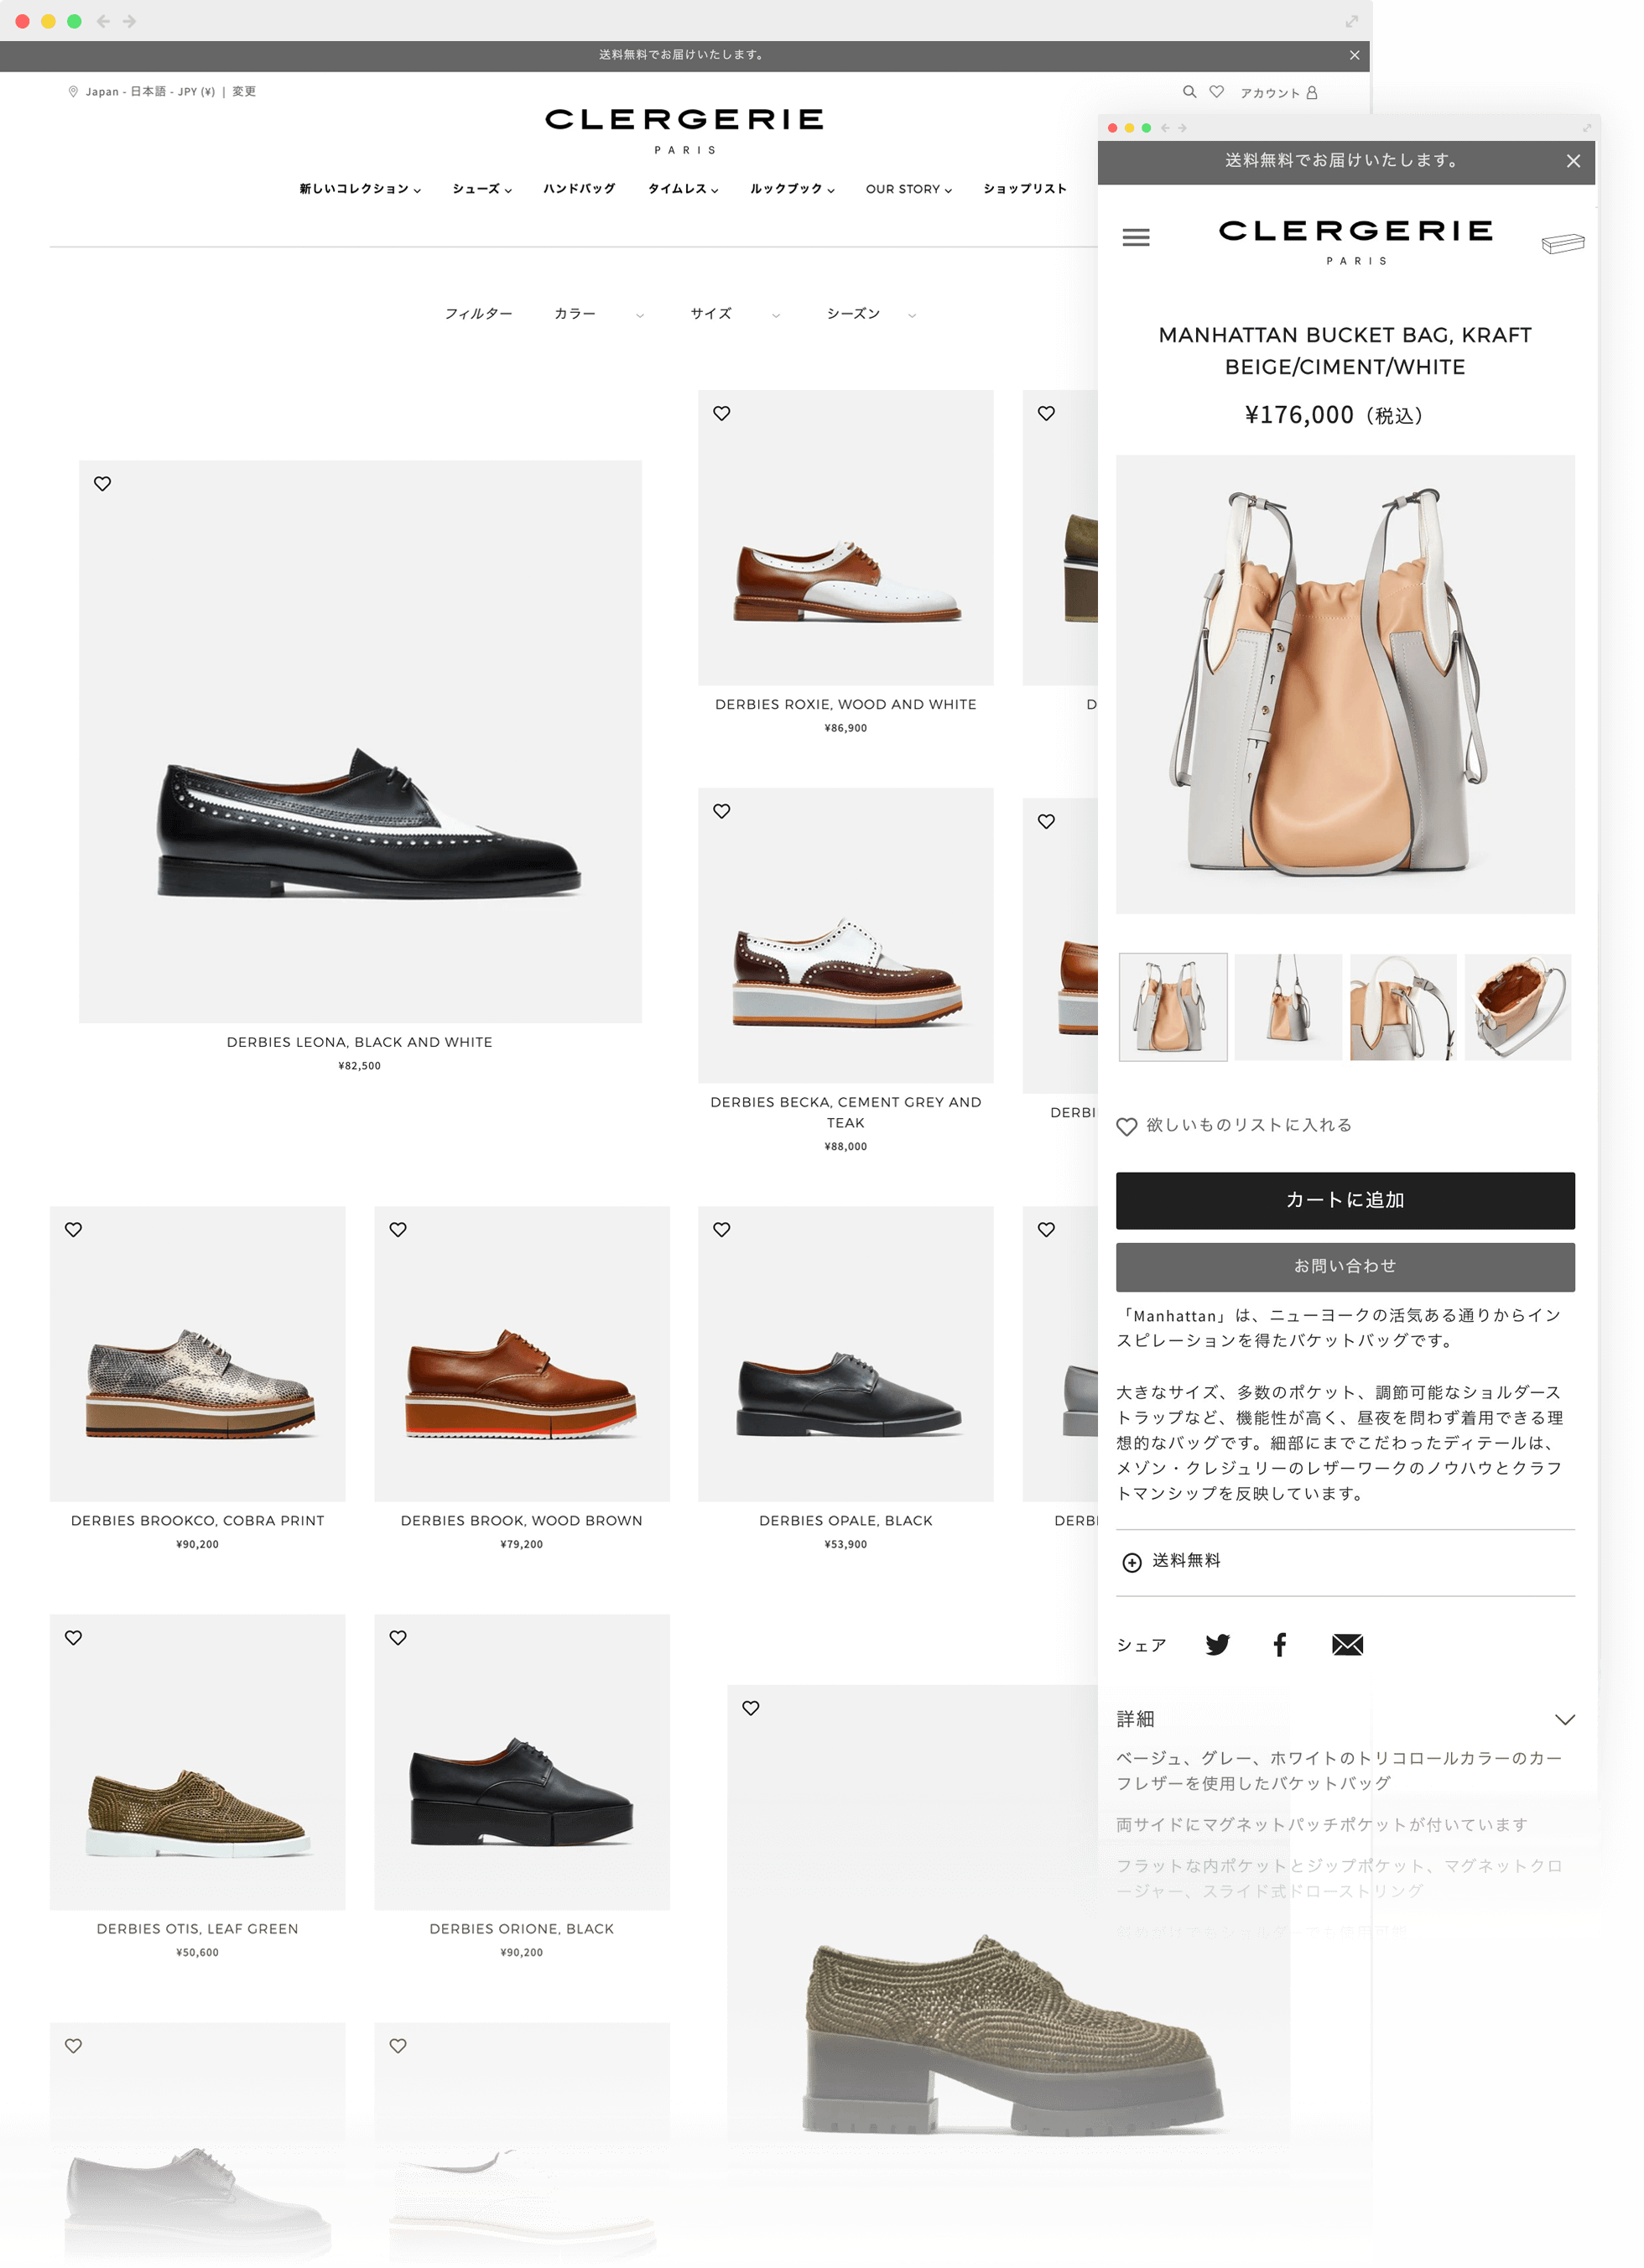 Clergerie e-Commerce store Screenshot Responsive Product Page Shoes Bags